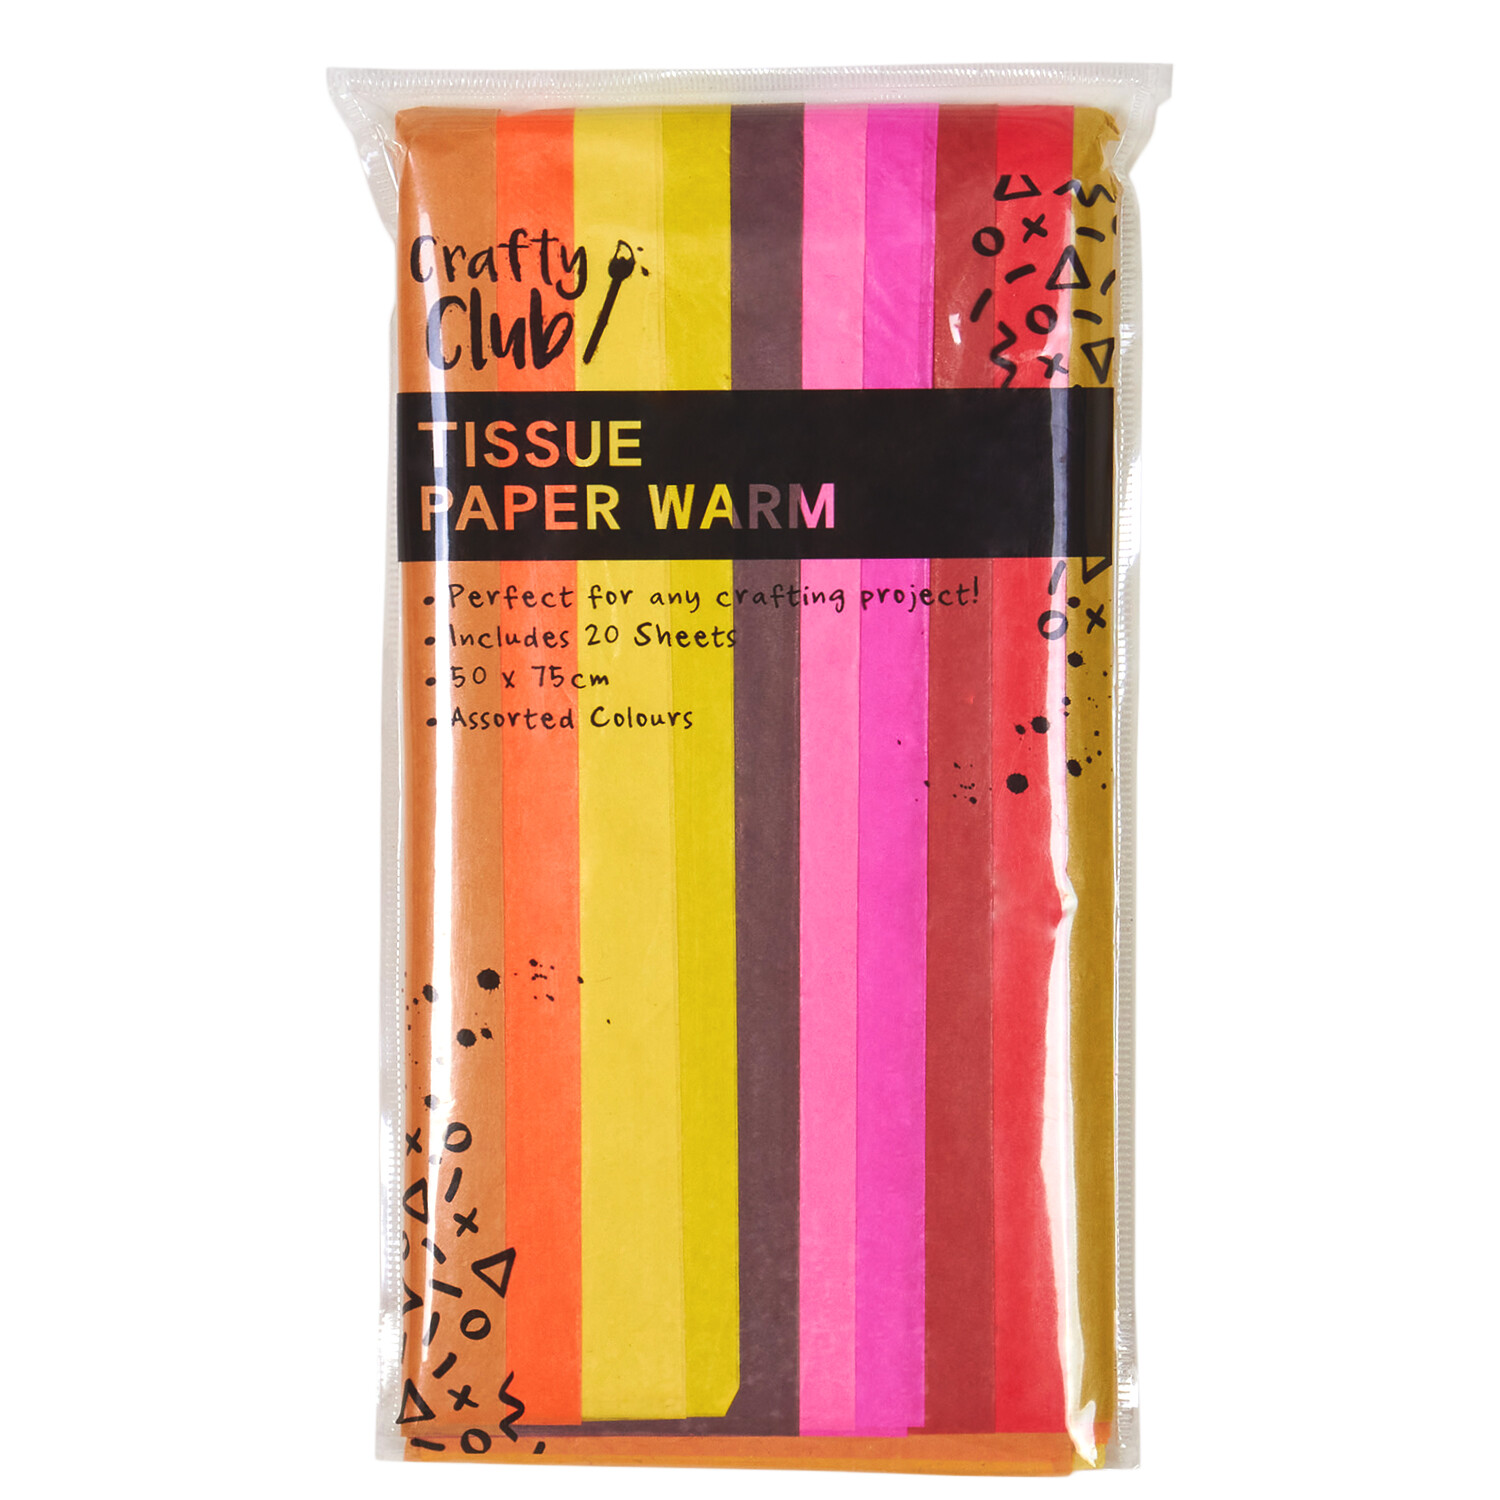 Pack of 20 Sheets of Tissue Paper - Warm Image